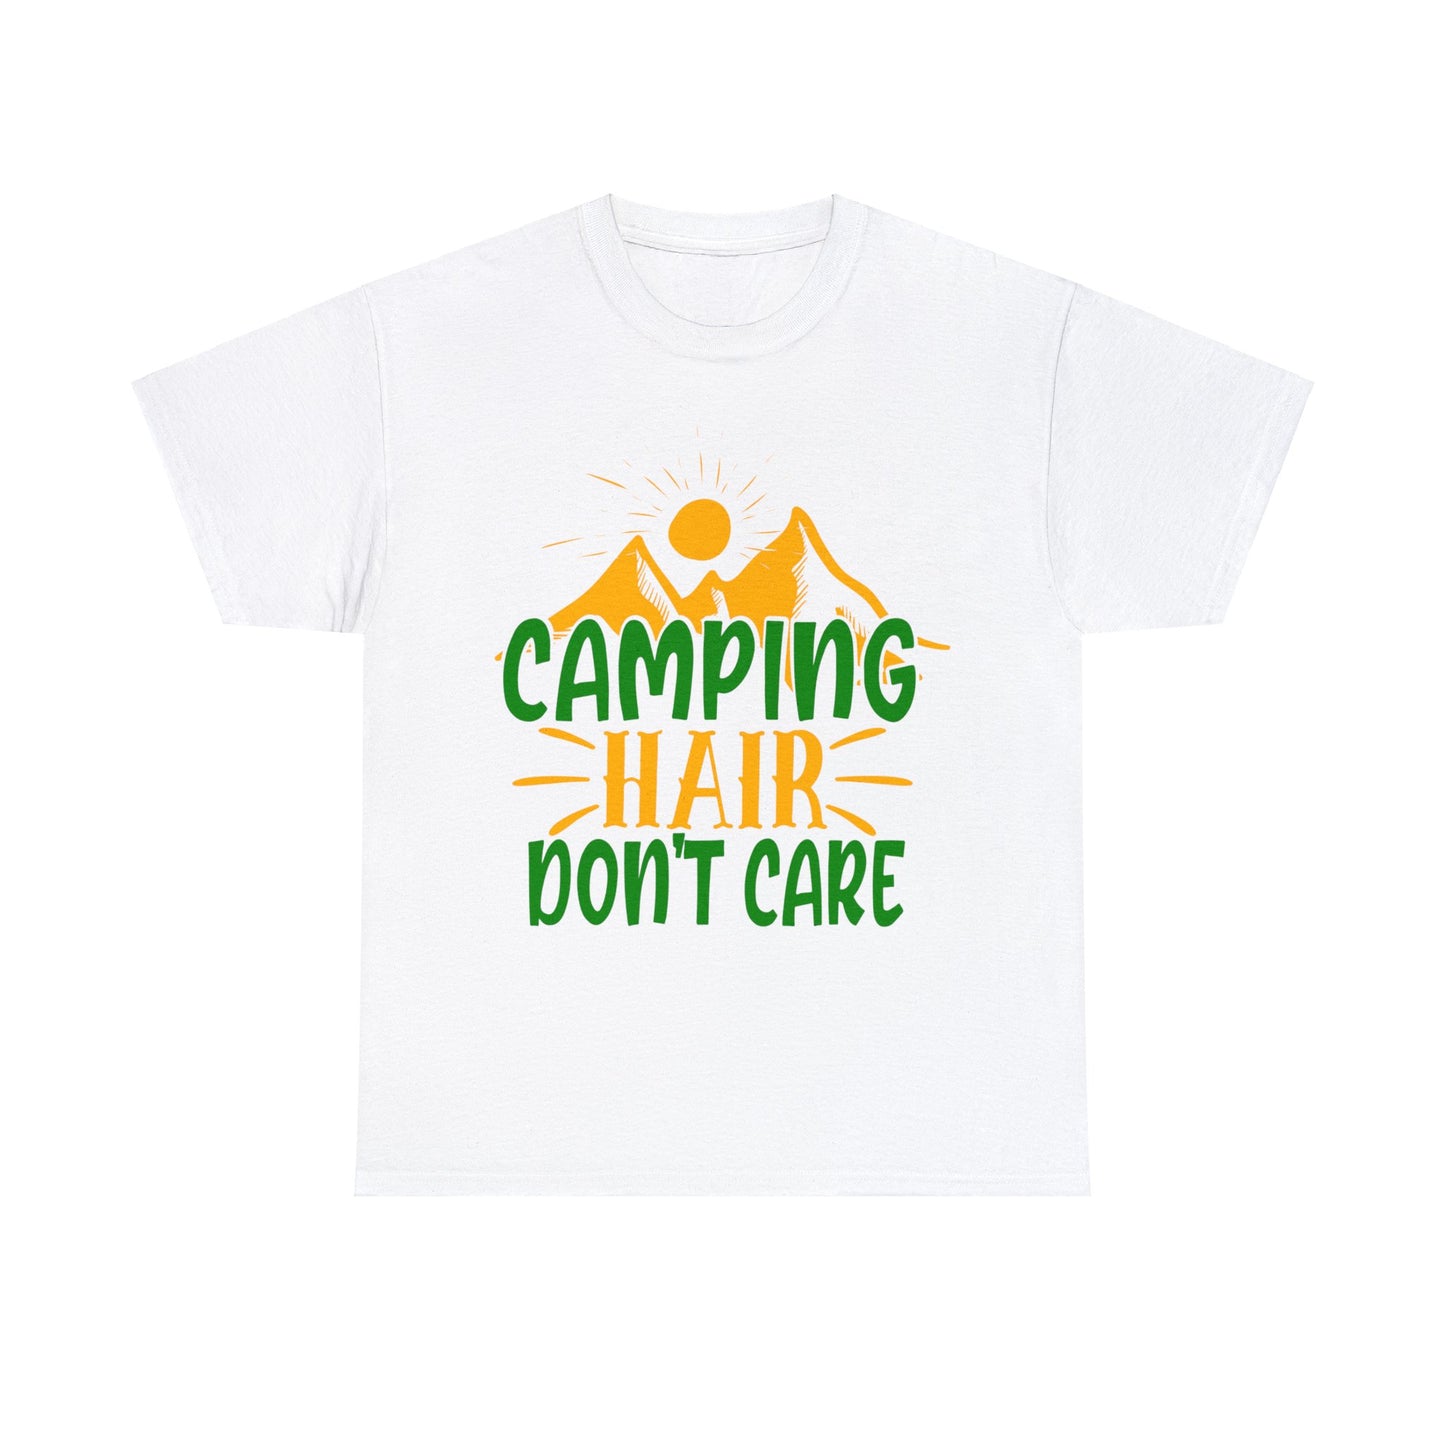 Camping Hair Don't Care T-Shirt: Outdoors in Style with this Fun Camping Tee!